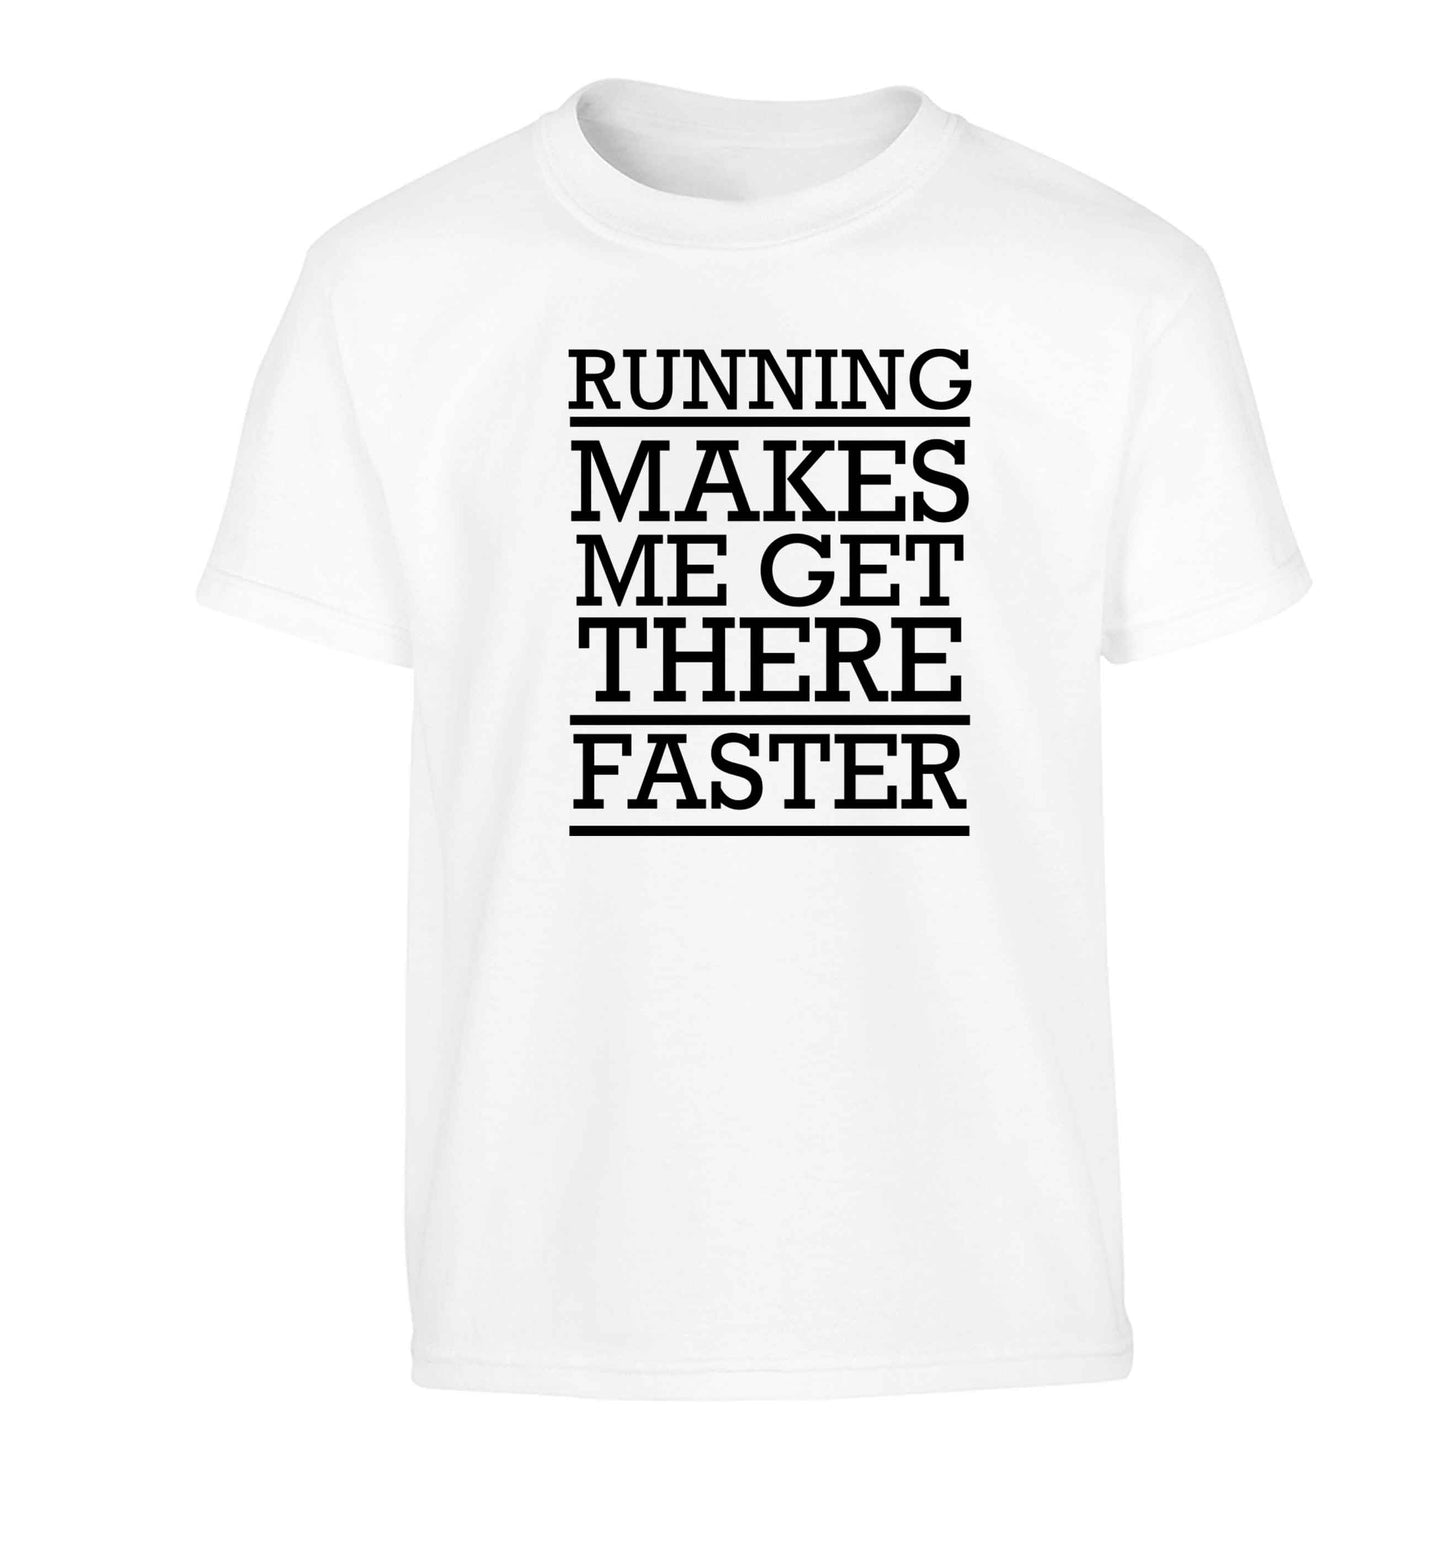 Running makes me get there faster Children's white Tshirt 12-13 Years